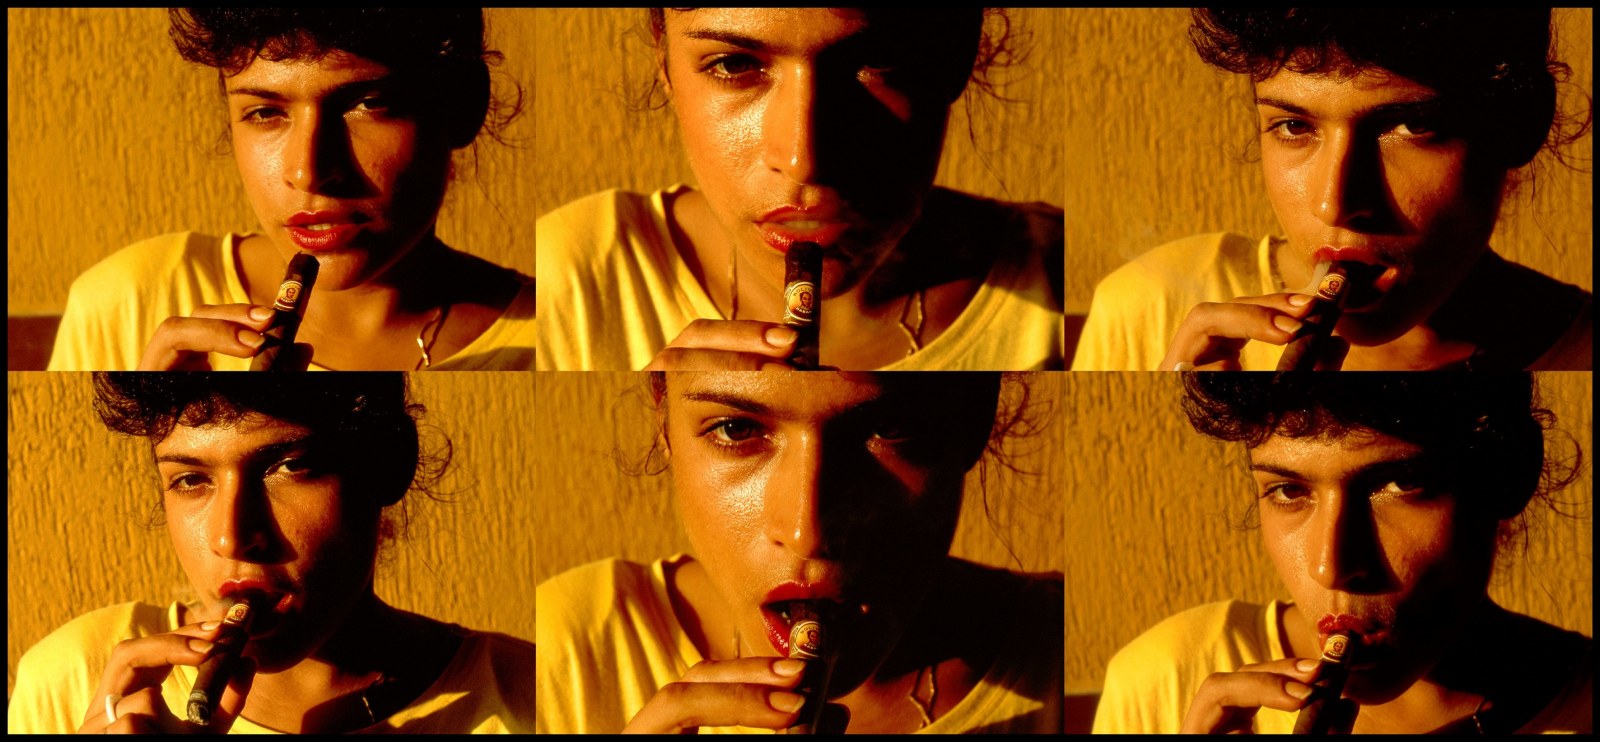 Six images of the same woman wearing a yellow shirt and smoking a cigar